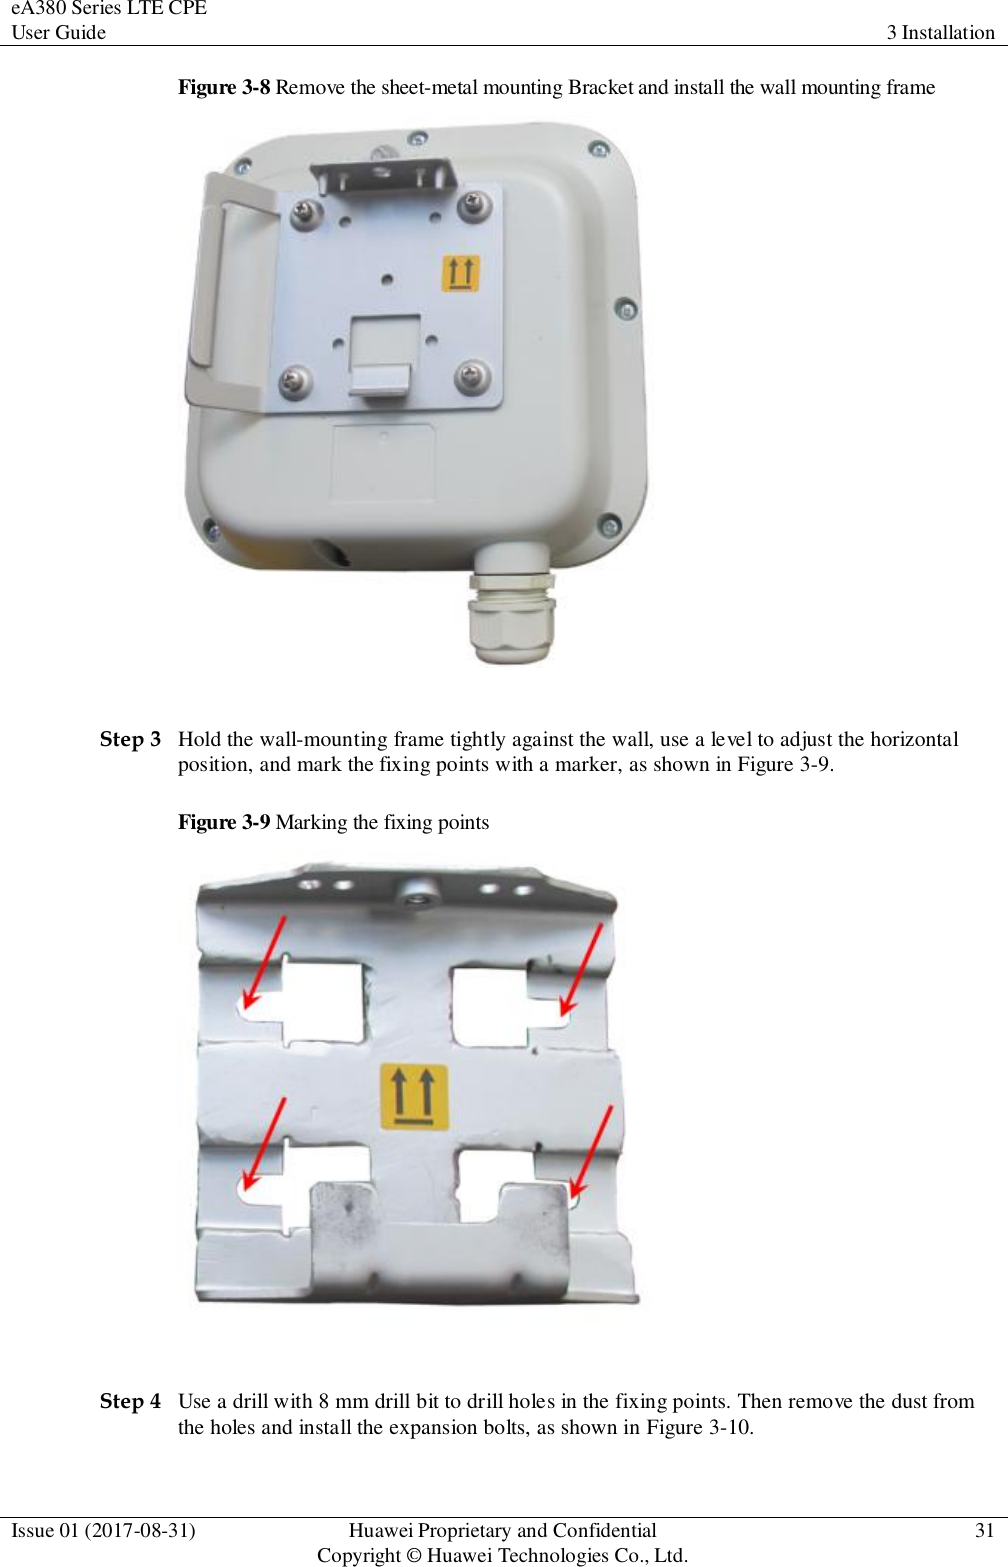 eA380 Series LTE CPE User Guide 3 Installation  Issue 01 (2017-08-31) Huawei Proprietary and Confidential                                     Copyright © Huawei Technologies Co., Ltd. 31  Figure 3-8 Remove the sheet-metal mounting Bracket and install the wall mounting frame   Step 3 Hold the wall-mounting frame tightly against the wall, use a level to adjust the horizontal position, and mark the fixing points with a marker, as shown in Figure 3-9. Figure 3-9 Marking the fixing points   Step 4 Use a drill with 8 mm drill bit to drill holes in the fixing points. Then remove the dust from the holes and install the expansion bolts, as shown in Figure 3-10. 